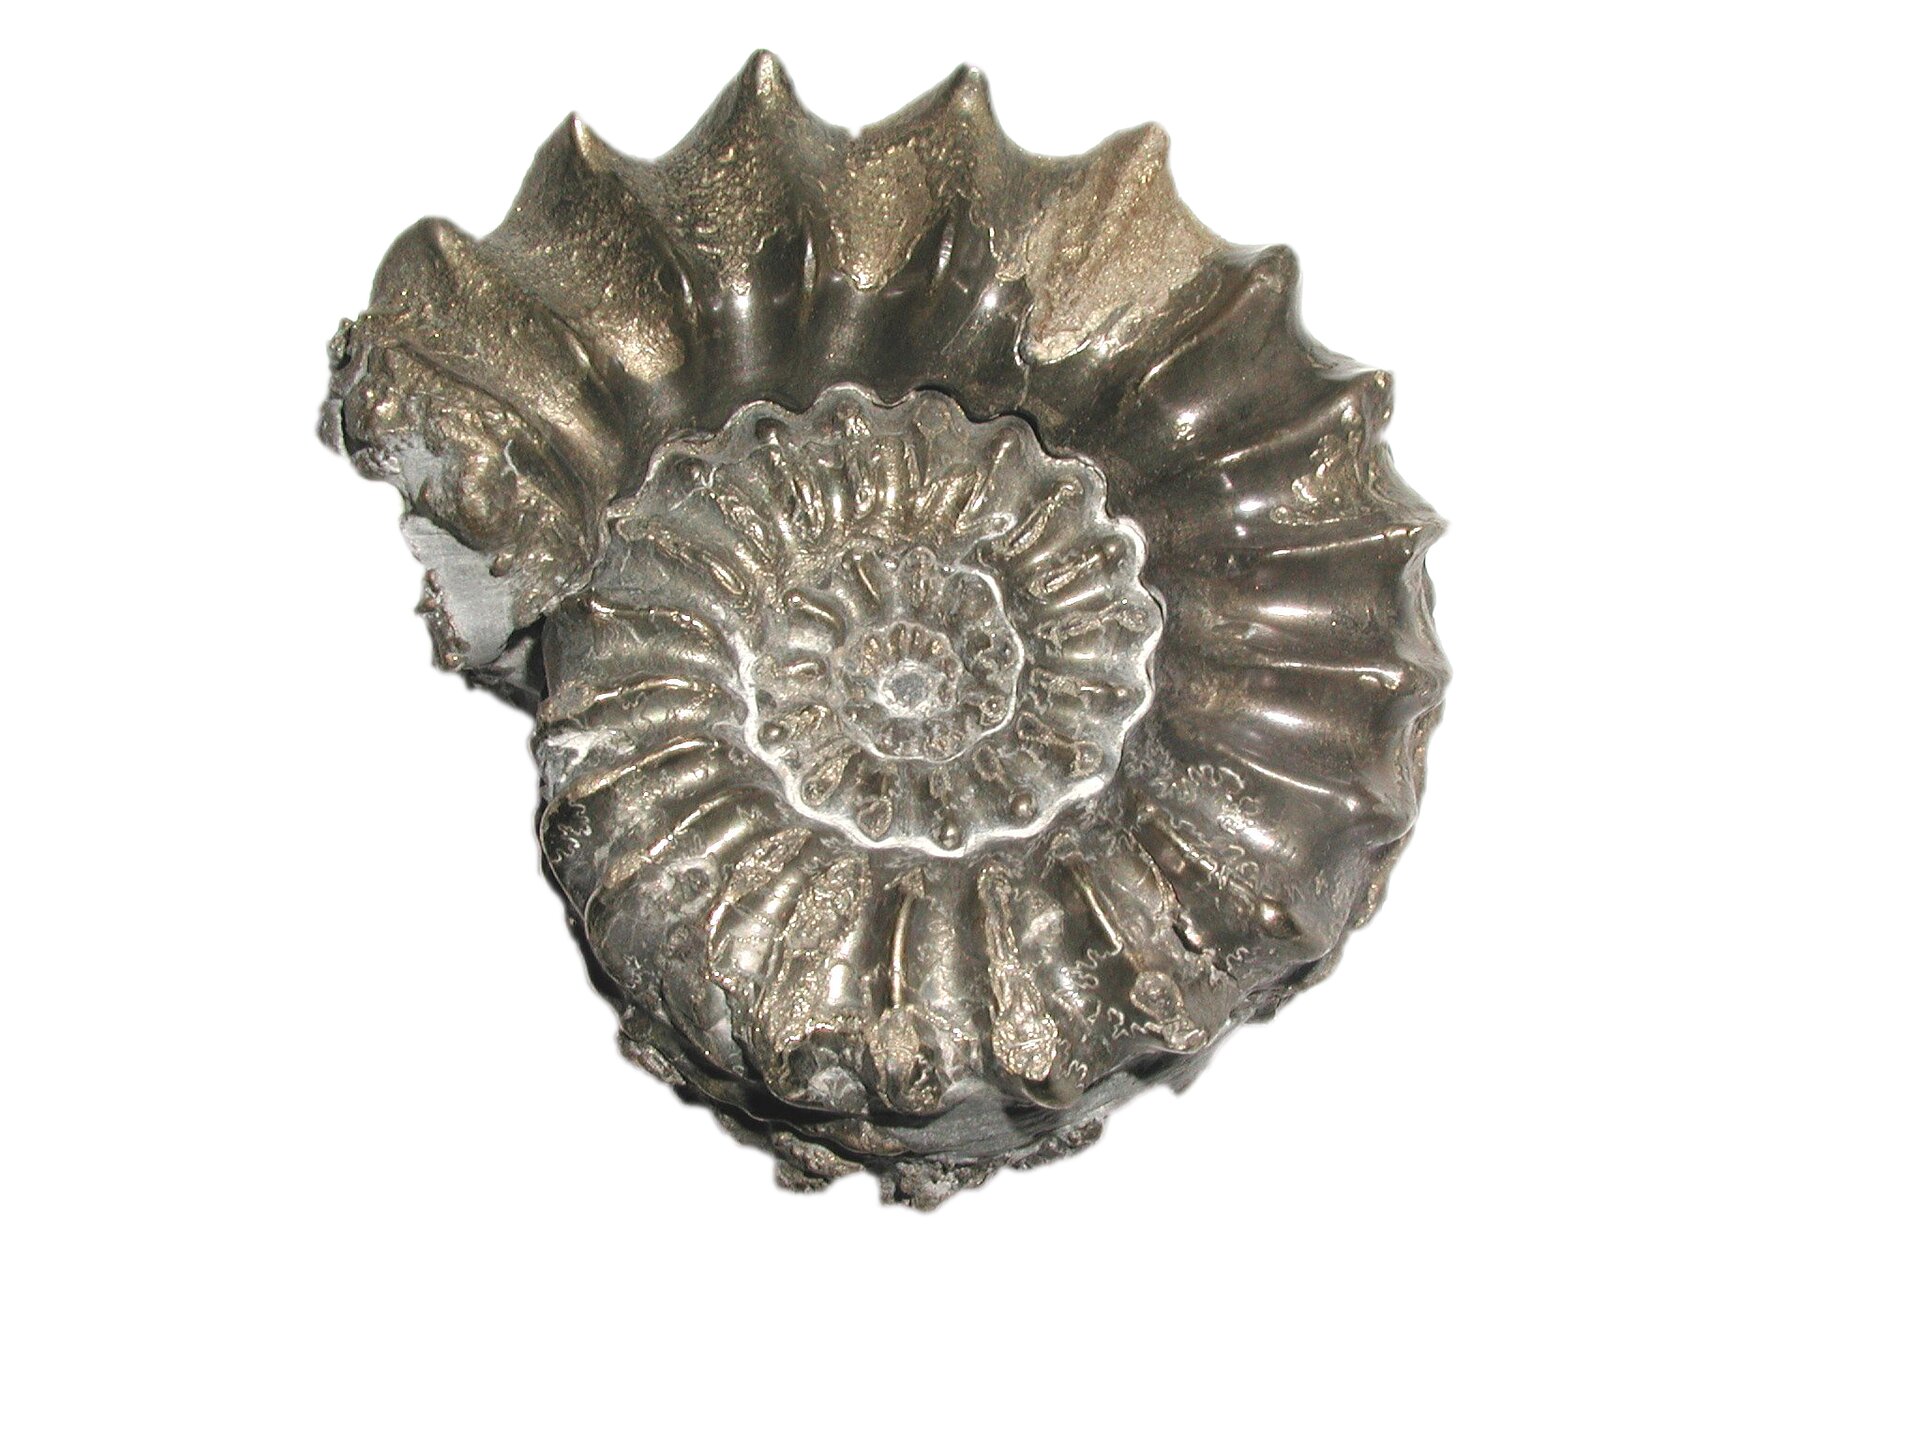 Meteorite impact sealed the fate of the ammonites and wiped out the dinosaurs